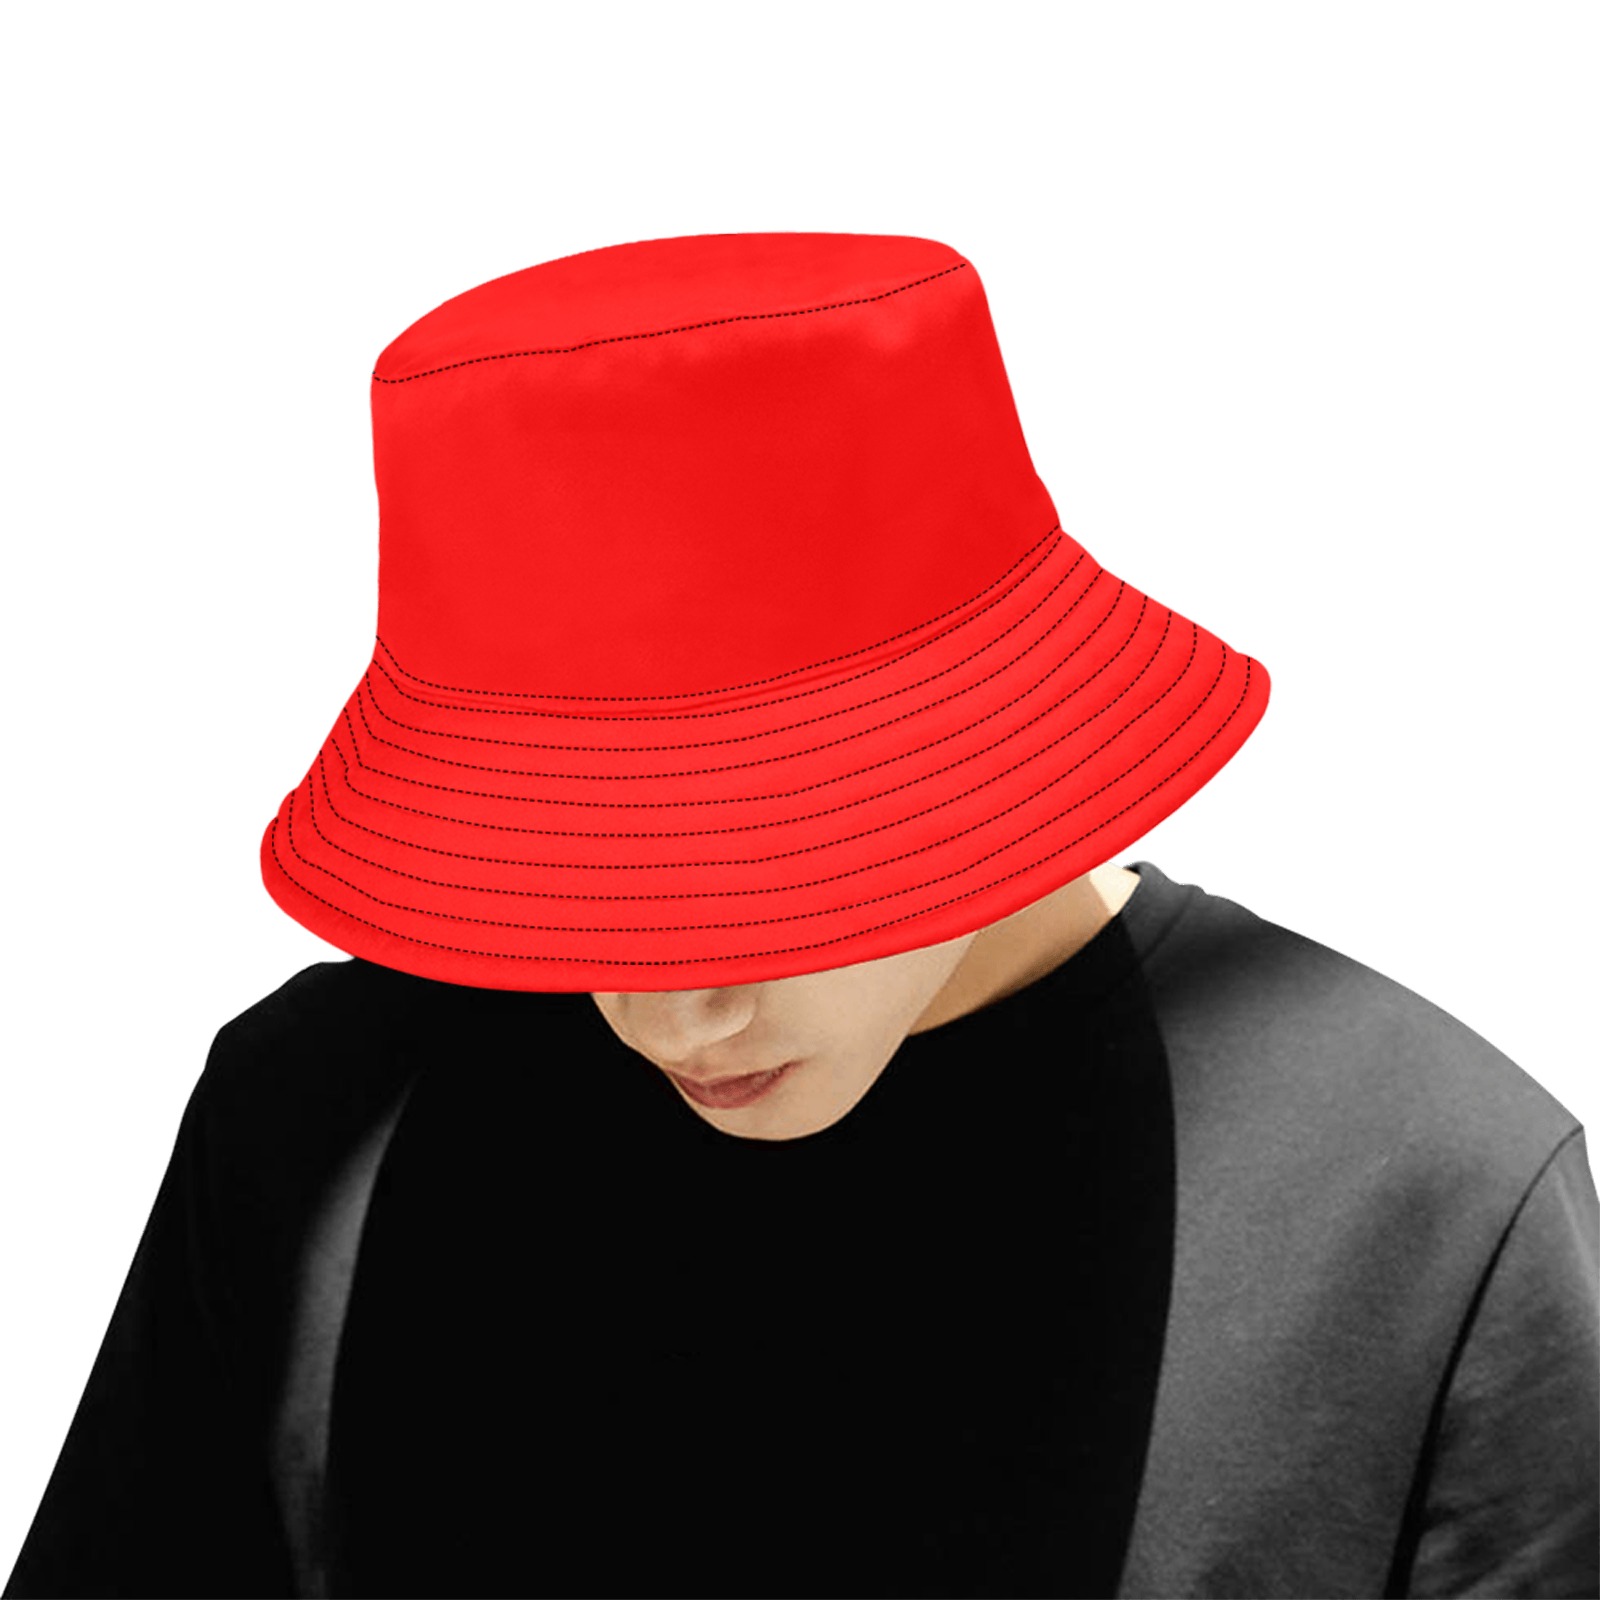 Merry Christmas Red Solid Color Unisex Summer Bucket Hat